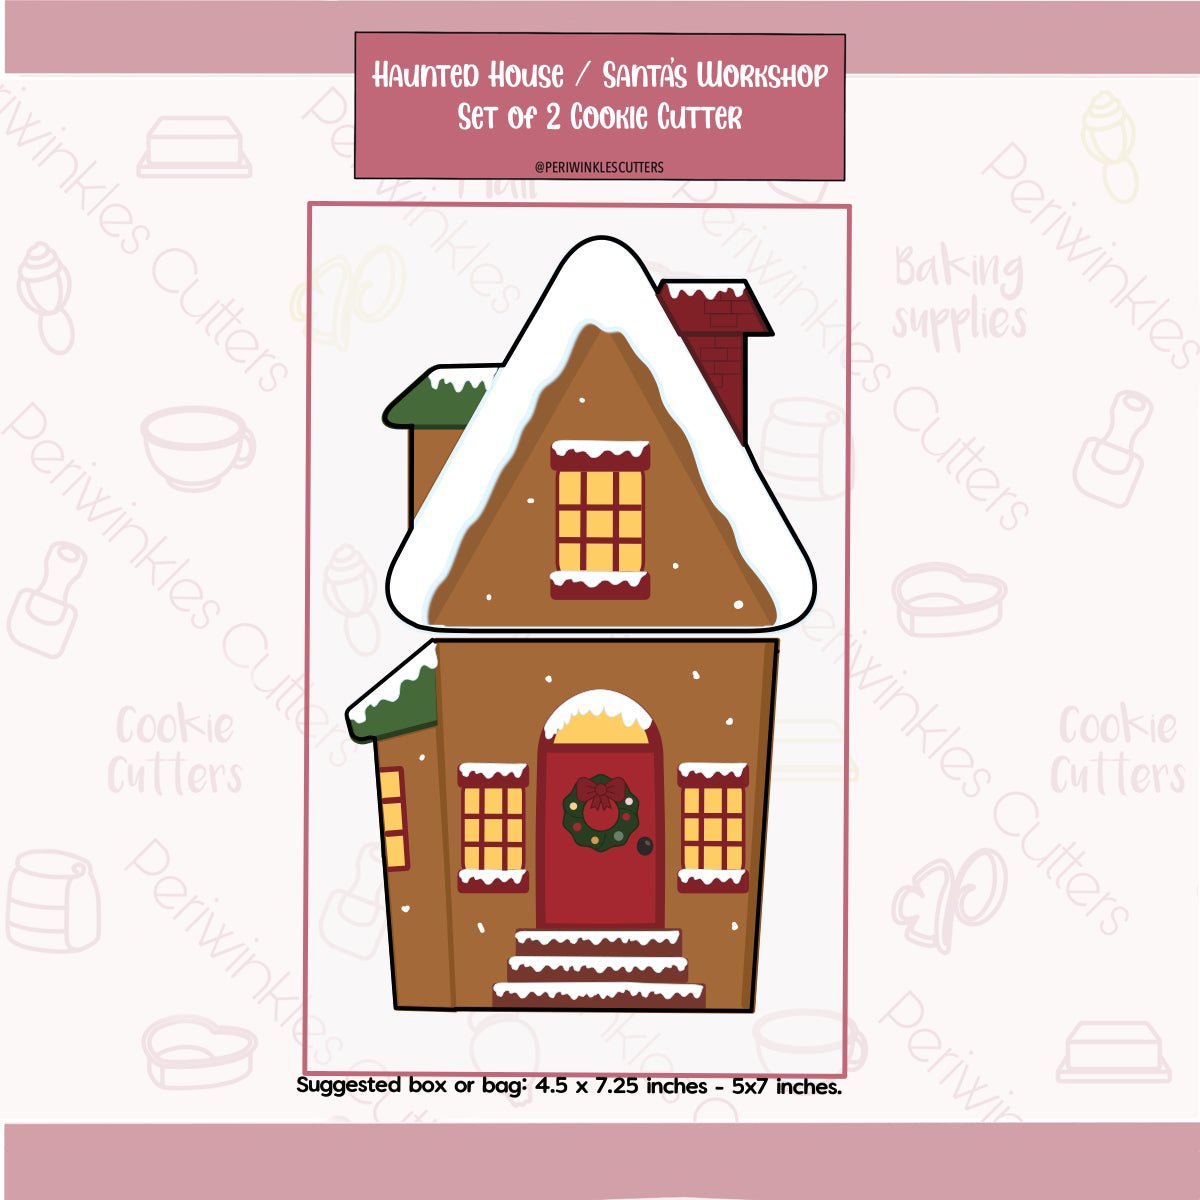 Gingerbread House 2 Pieces Set - Periwinkles Cutters Cookie Cutters